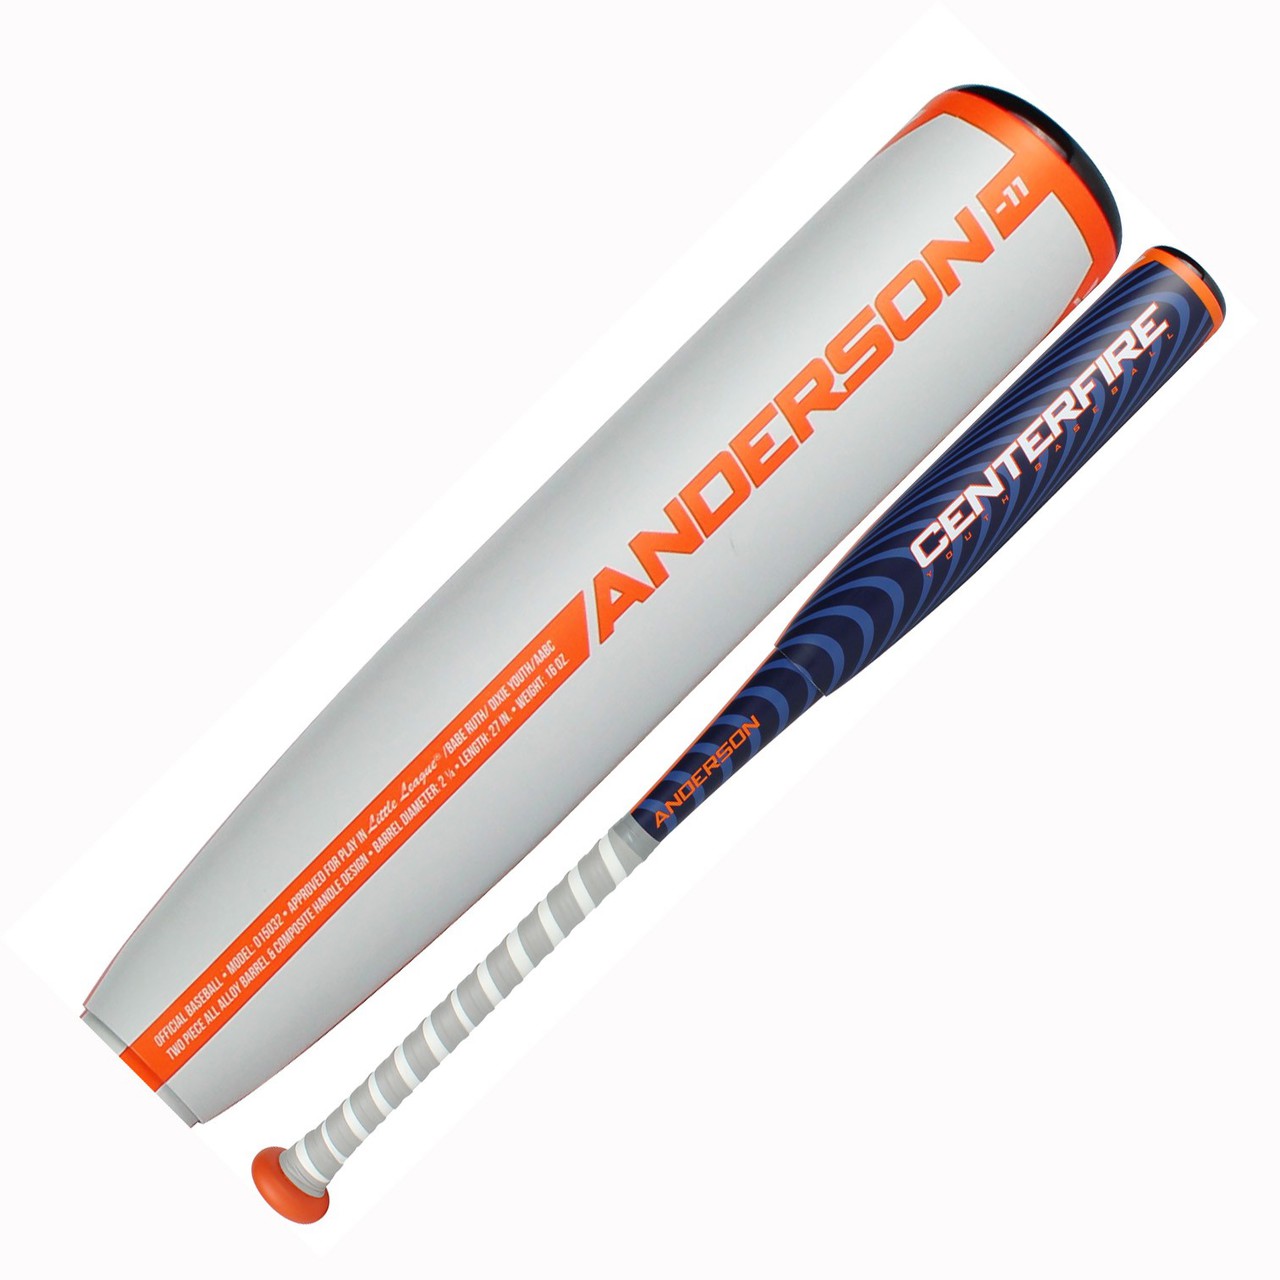 anderson-centerfire-28-inch-17-oz-youth-baseball-bat 015032-28-inch-17-oz Anderson 874147007686 The Anderson Centerfire baseball bat is our latest addition to our